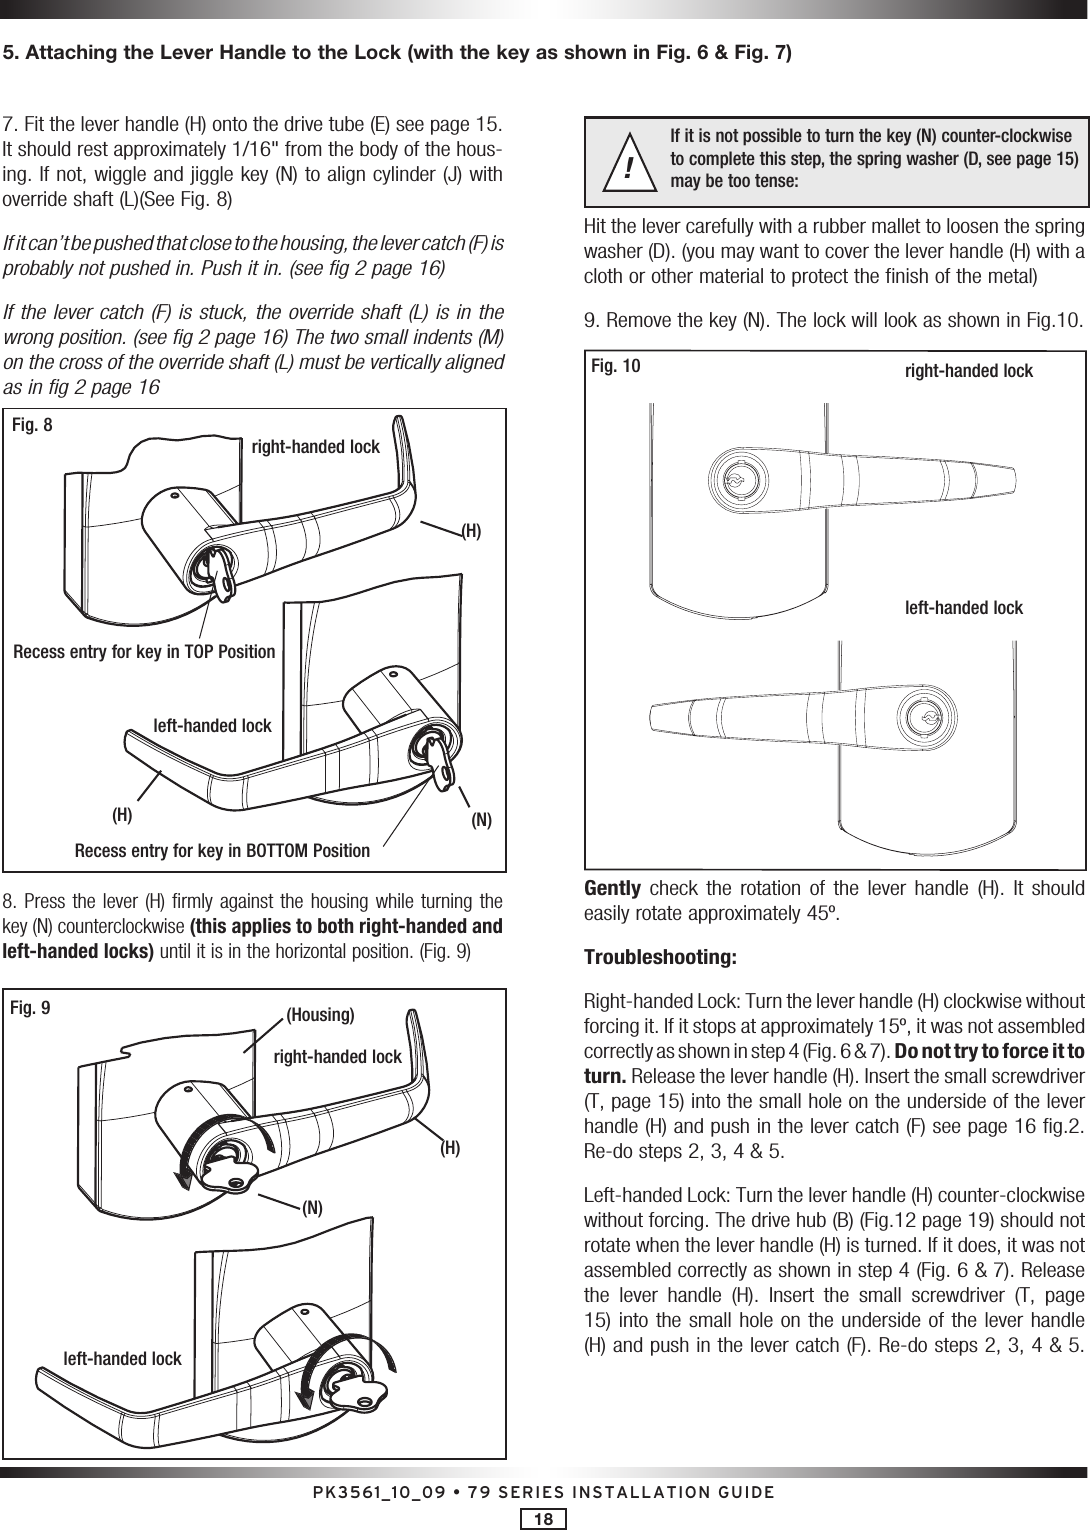 PK3561_10_09 • 79 SERIES INSTALLATION GUIDE187. Fit the lever handle (H) onto the drive tube (E) see page 15. It should rest approximately 1/16&quot; from the body of the hous-ing. If not, wiggle and jiggle key (N) to align cylinder (J) with override shaft (L)(See Fig. 8)If it can’t be pushed that close to the housing, the lever catch (F) is  probably not pushed in. Push it in. (see fig 2 page 16)If the lever catch (F) is stuck, the override shaft (L) is in the wrong position. (see fig 2 page 16) The two small indents (M) on the cross of the override shaft (L) must be vertically aligned as in fig 2 page 16right-handed lockRecess entry for key in TOP PositionRecess entry for key in BOTTOM Positionleft-handed lockFig. 8(H)(N)(H)8. Press the  lever  (H) firmly against the  housing  while turning the key (N) counterclockwise (this applies to both right-handed and left-handed locks) until it is in the horizontal position. (Fig. 9)Fig. 9right-handed lockleft-handed lock(Housing)(N)(H)If it is not possible to turn the key (N) counter-clockwise  to complete this step, the spring washer (D, see page 15) may be too tense:!Hit the lever carefully with a rubber mallet to loosen the spring washer (D). (you may want to cover the lever handle (H) with a cloth or other material to protect the finish of the metal)9. Remove the key (N). The lock will look as shown in Fig.10.right-handed lockleft-handed lockFig. 10Gently  check  the  rotation  of  the  lever  handle  (H).  It  should easily rotate approximately 45º. Troubleshooting:Right-handed Lock: Turn the lever handle (H) clockwise without forcing it. If it stops at approximately 15º, it was not assembled correctly as shown in step 4 (Fig. 6 &amp; 7). Do not try to force it to turn. Release the lever handle (H). Insert the small screwdriver (T, page 15) into the small hole on the underside of the lever handle (H) and push in the lever catch (F) see page 16 fig.2.  Re-do steps 2, 3, 4 &amp; 5.Left-handed Lock: Turn the lever handle (H) counter-clockwise without forcing. The drive hub (B) (Fig.12 page 19) should not rotate when the lever handle (H) is turned. If it does, it was not assembled correctly as shown in step 4 (Fig. 6 &amp; 7). Release the  lever  handle  (H).  Insert  the  small  screwdriver  (T,  page 15) into the small hole on the underside  of the lever handle (H) and push in the lever catch (F). Re-do steps 2, 3, 4 &amp; 5. 5. Attaching the Lever Handle to the Lock (with the key as shown in Fig. 6 &amp; Fig. 7)